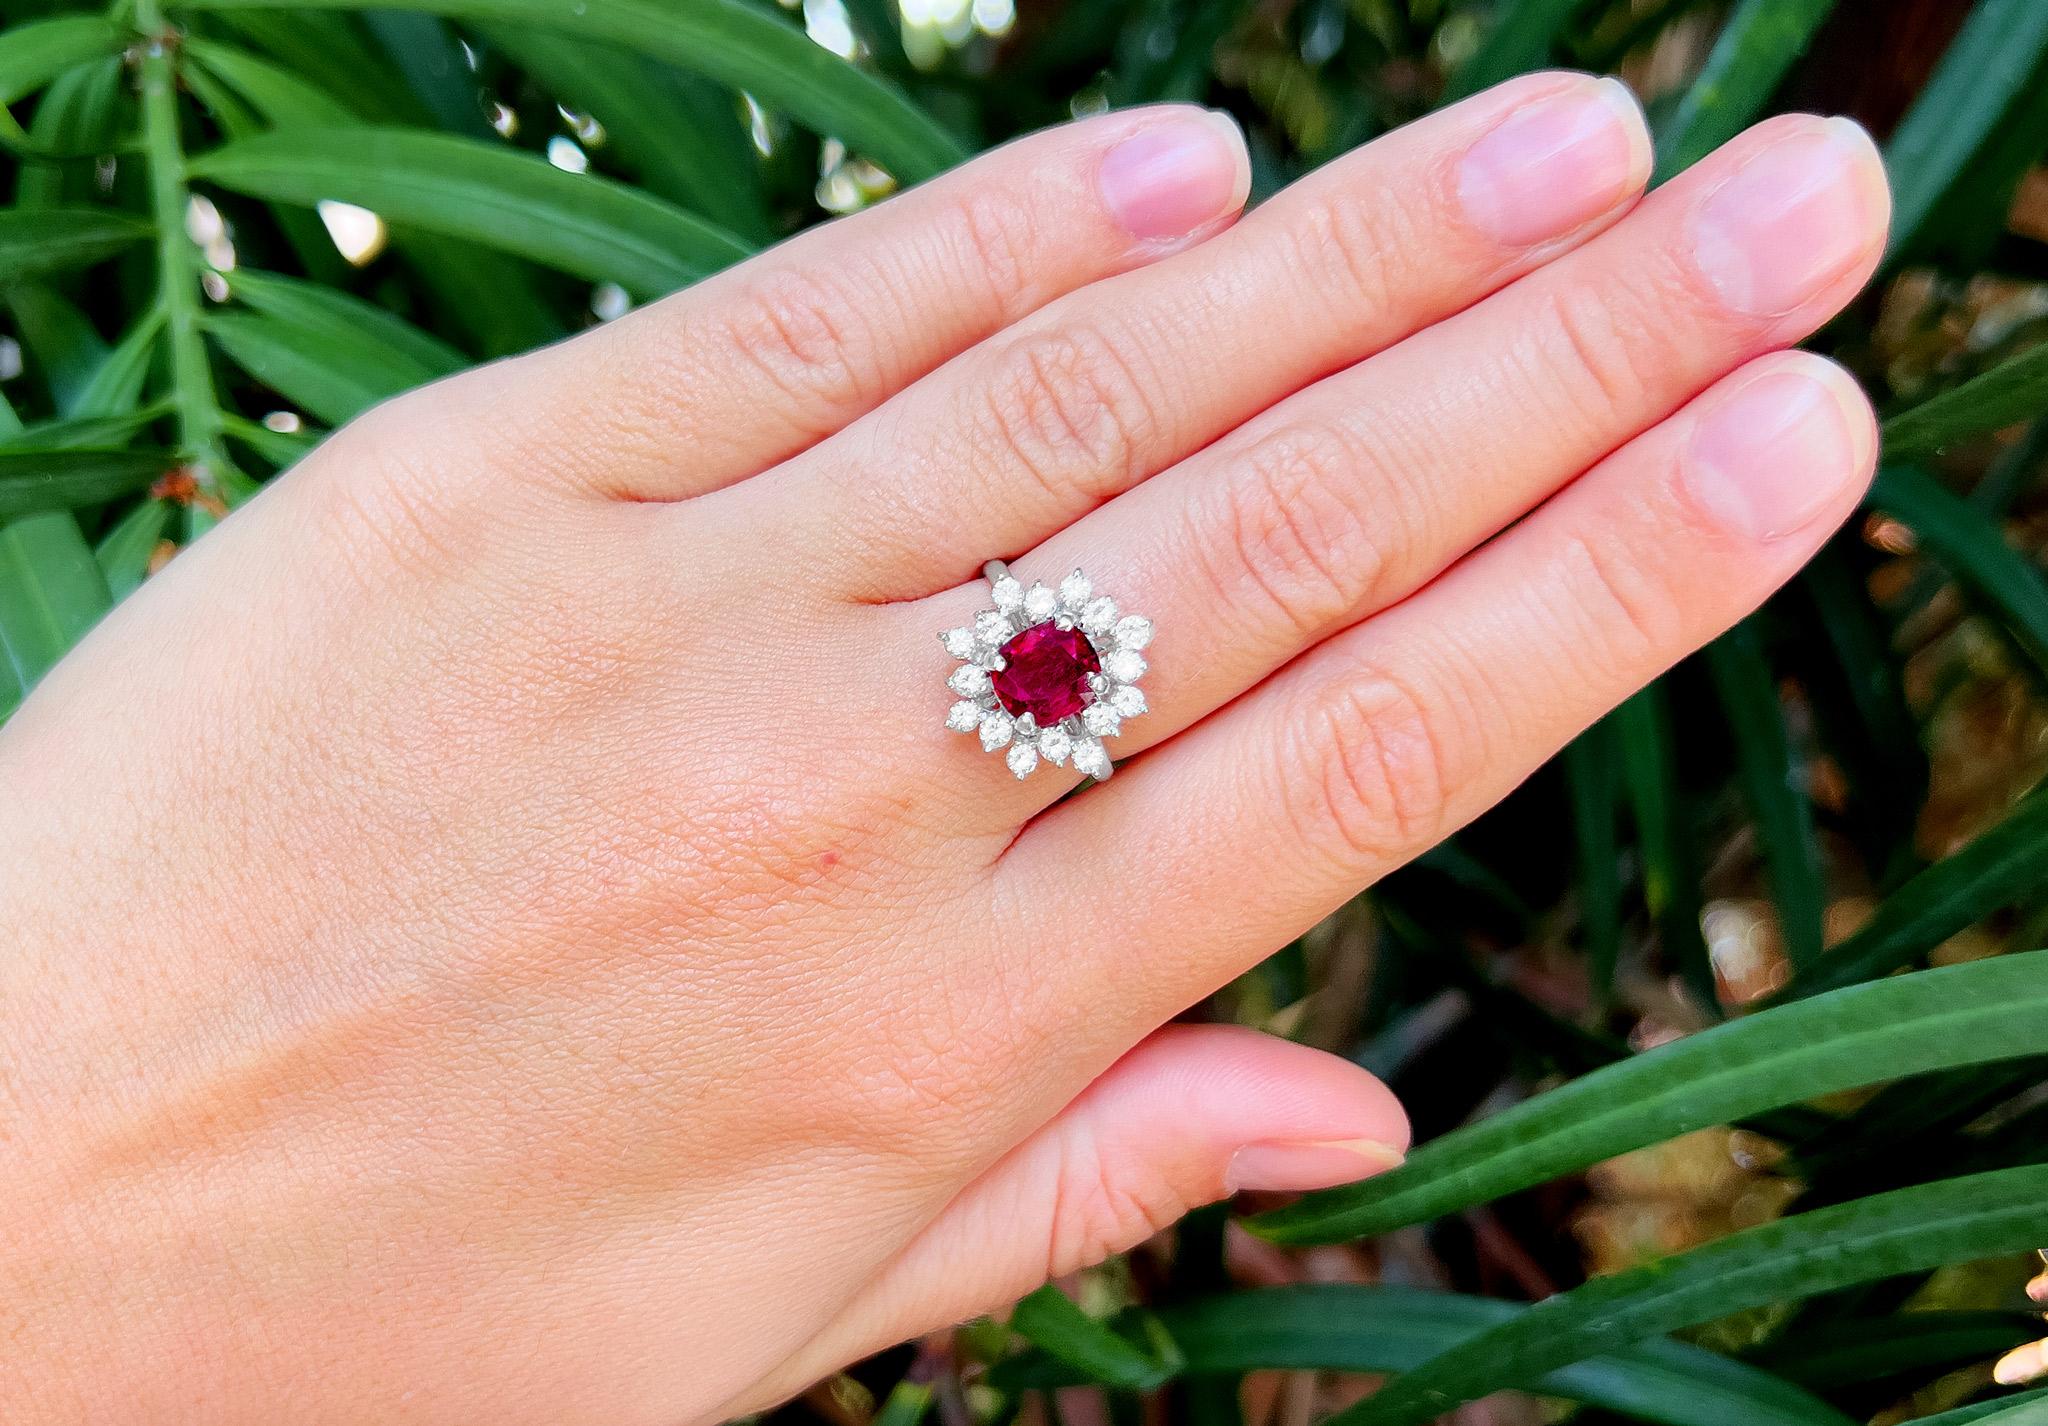 Very Fine Ruby = 2.50 Carat
Cut: Cushion
Diamonds = 0.70 Carats
( Color: F, Clarity: VS )
Metal: 14K Gold
Ring Size: 6.25* US
*It can be resized complimentary